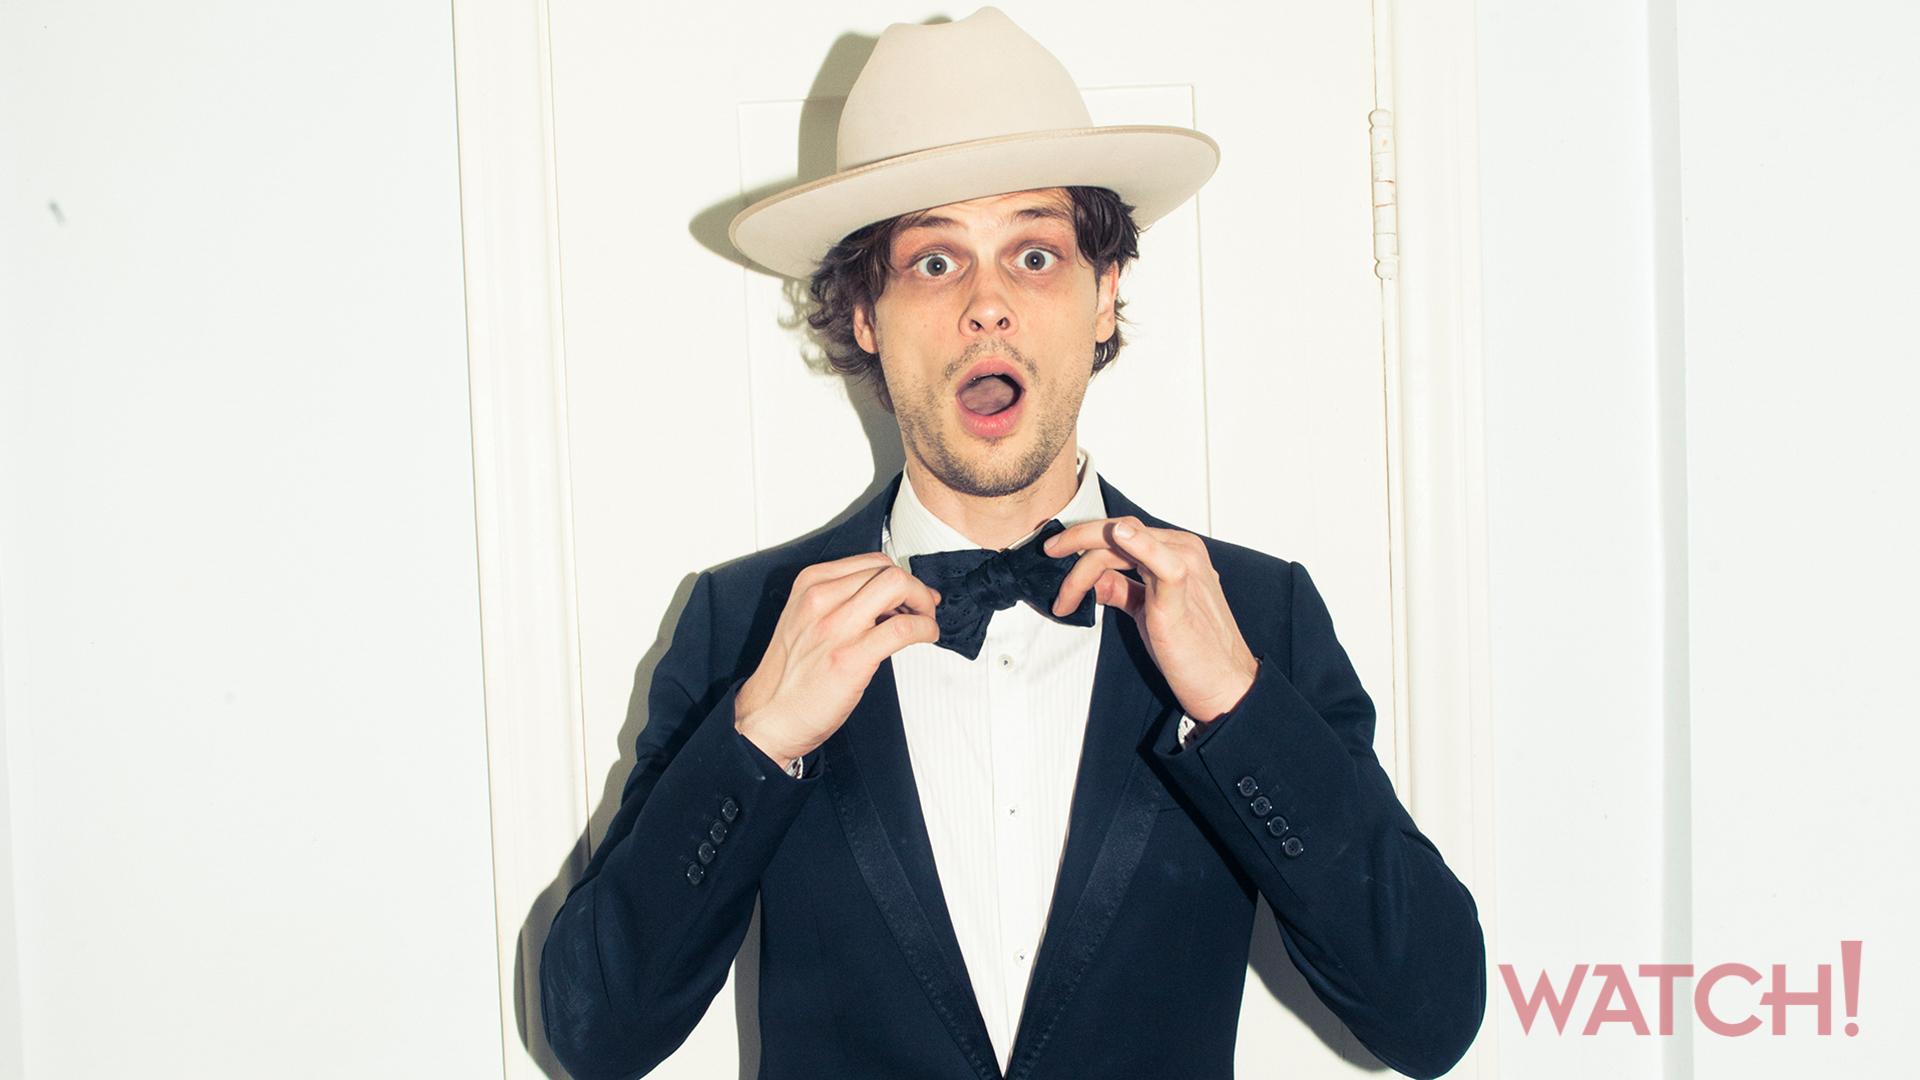 Up Close And Personal With Criminal Minds Star Matthew Gray Gubler